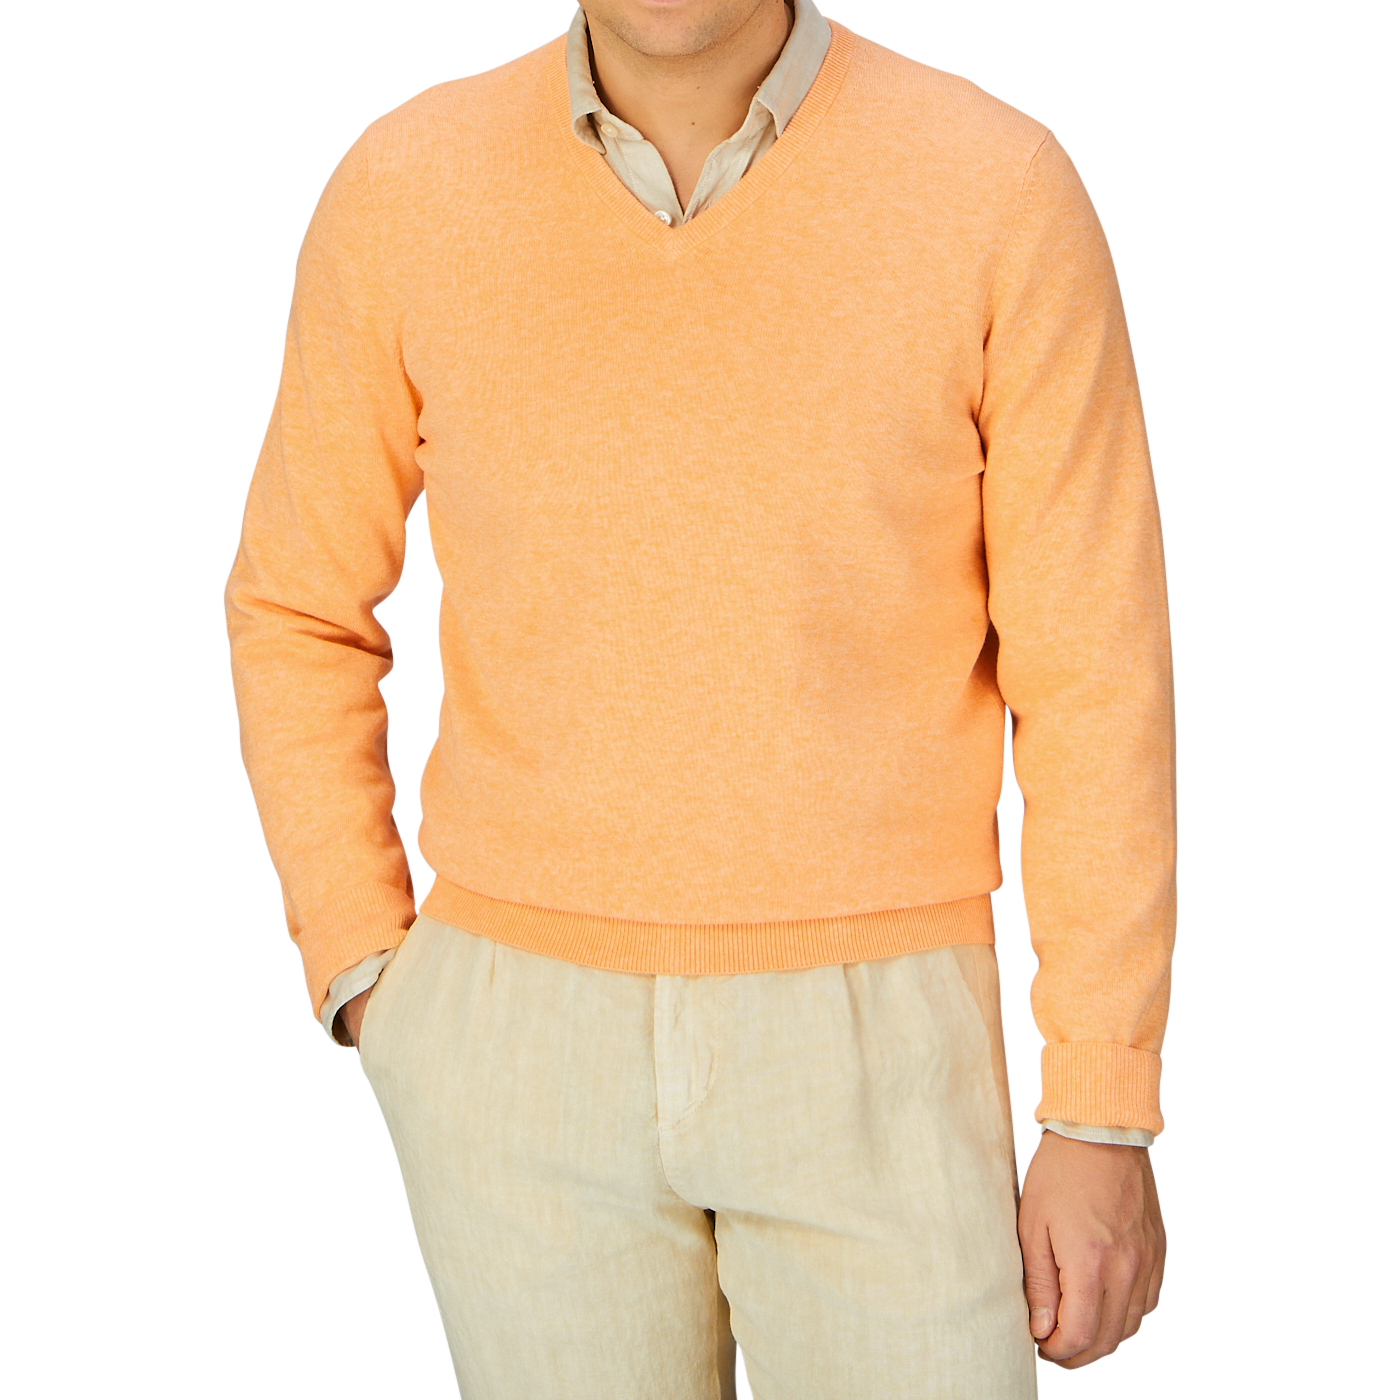 Man wearing an Alan Paine mango orange luxury cotton v-neck sweater over a light shirt with beige pants.